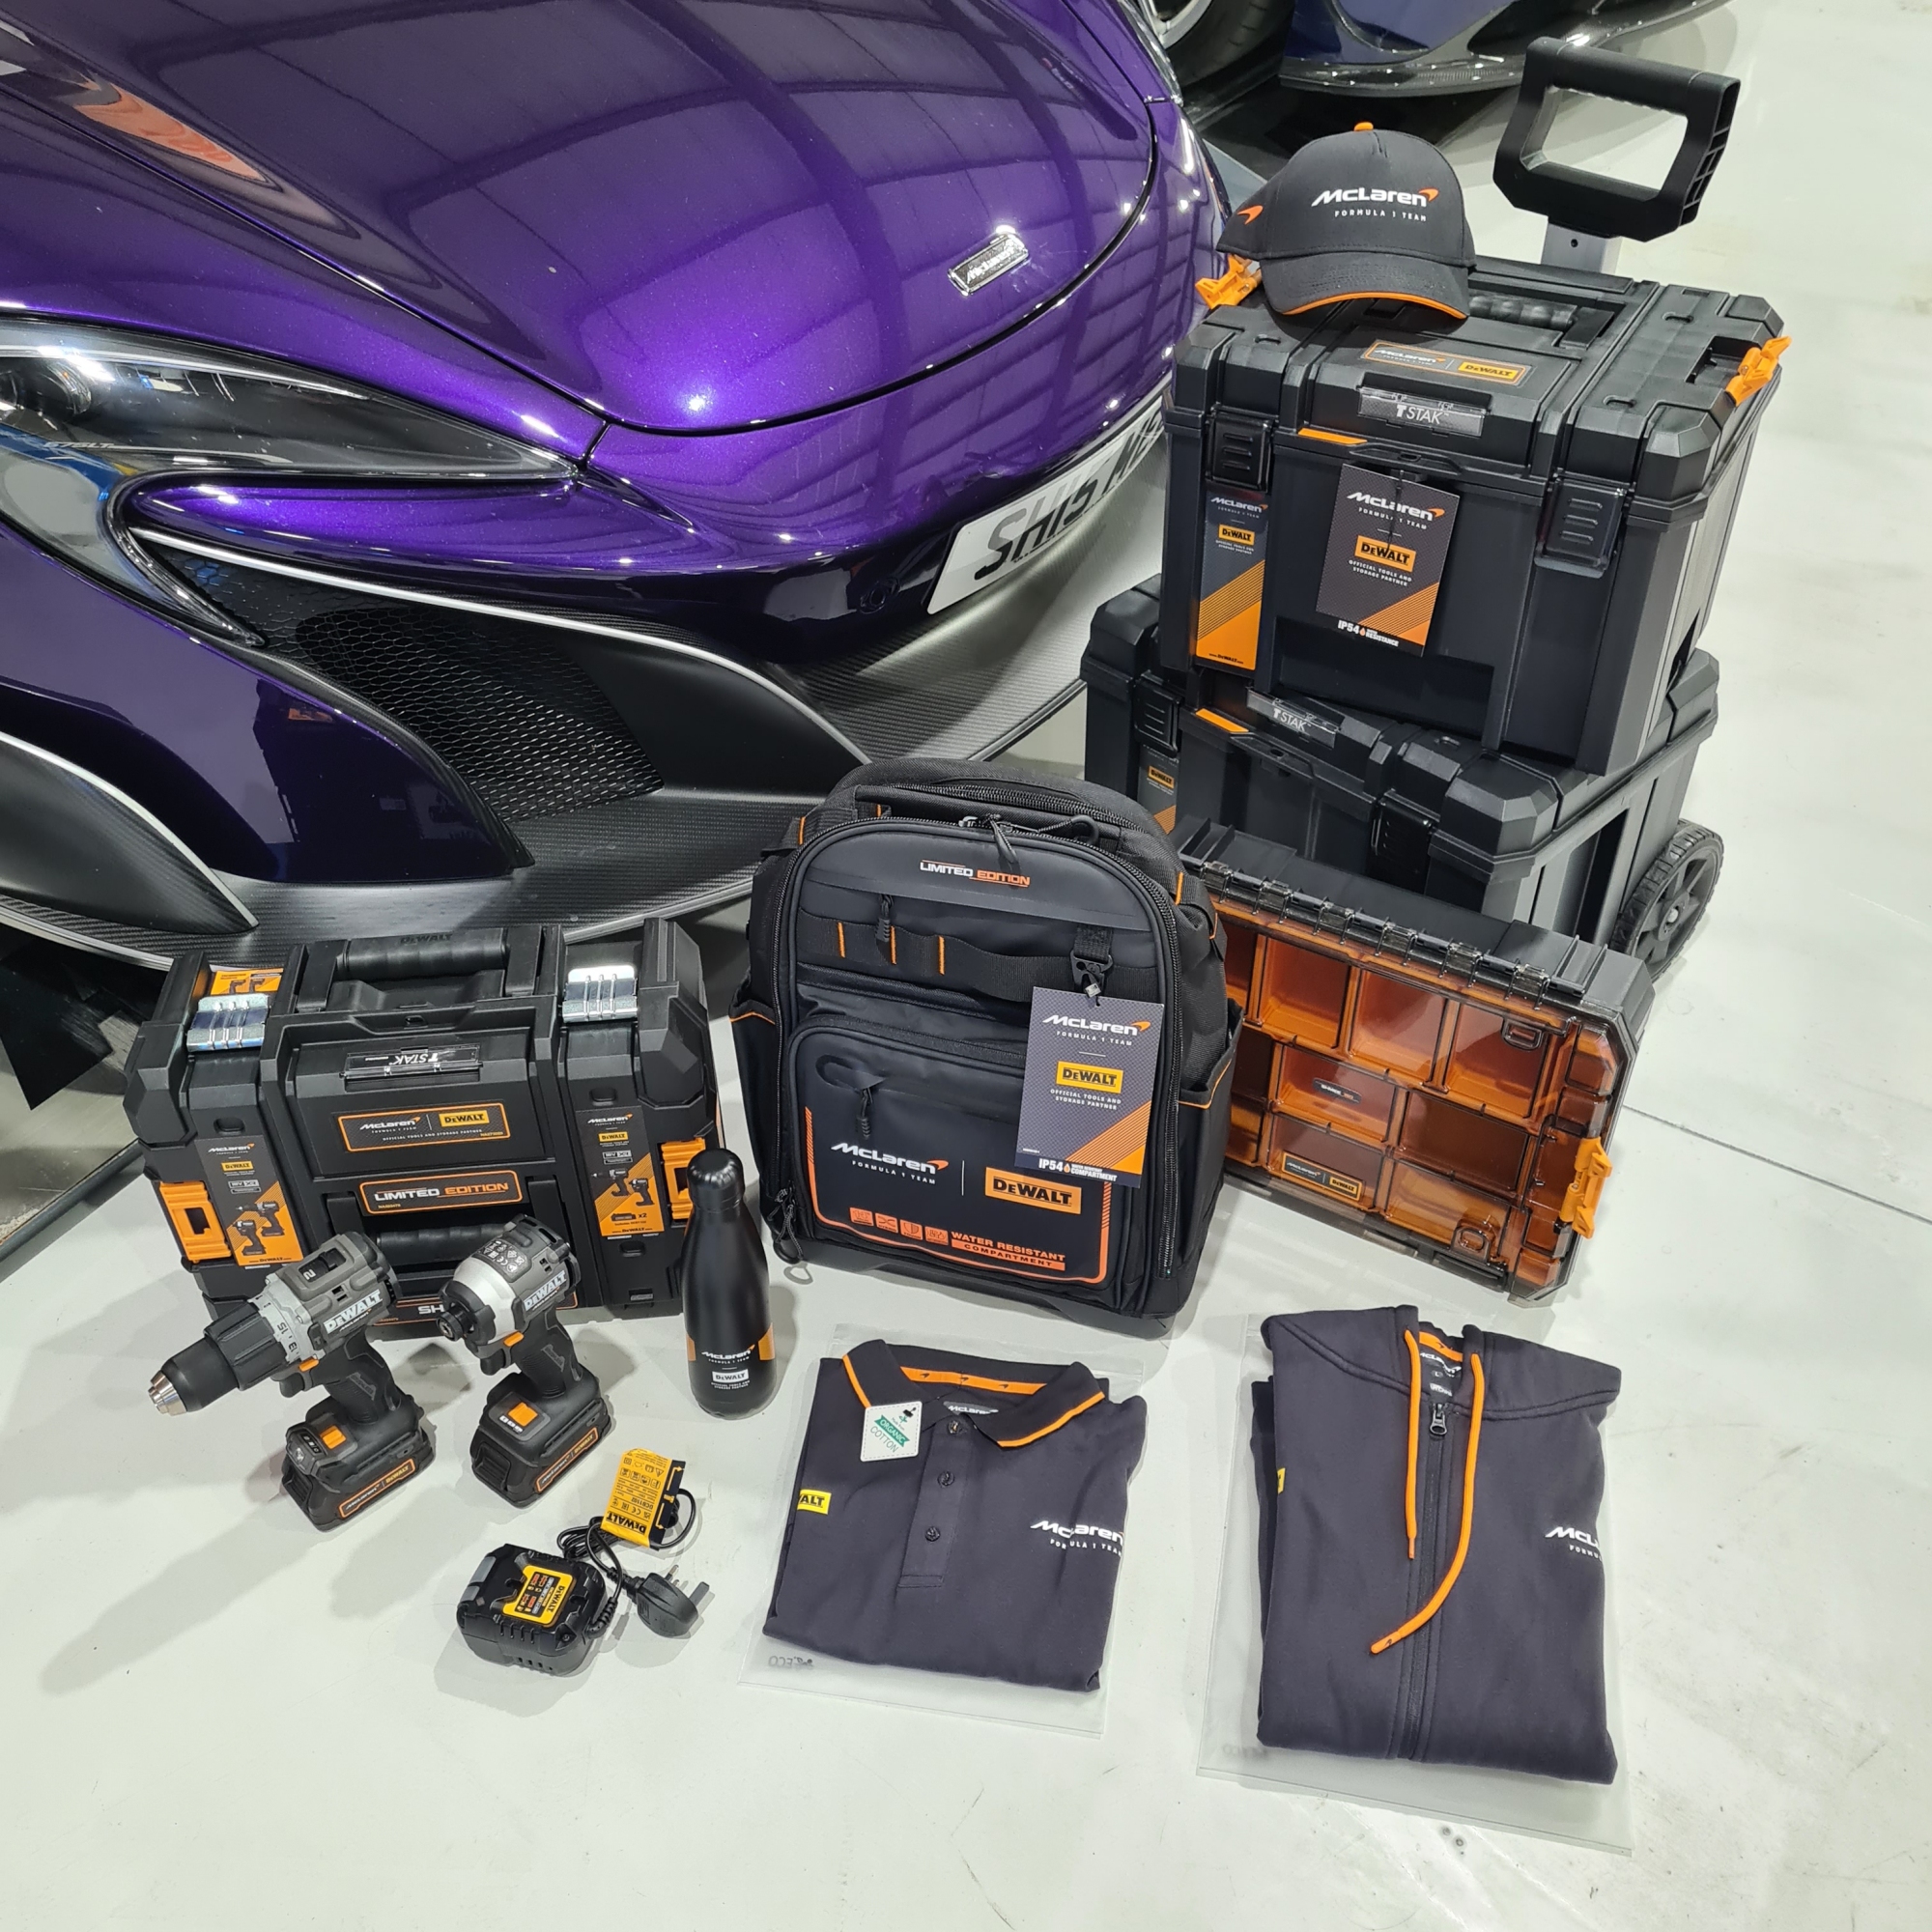 Shmee150 on X: Enter now for 2 chances to win! Firstly, there is the  option to win a DEWALT x McLaren F1 team tool kit, but that's not all! You  also have